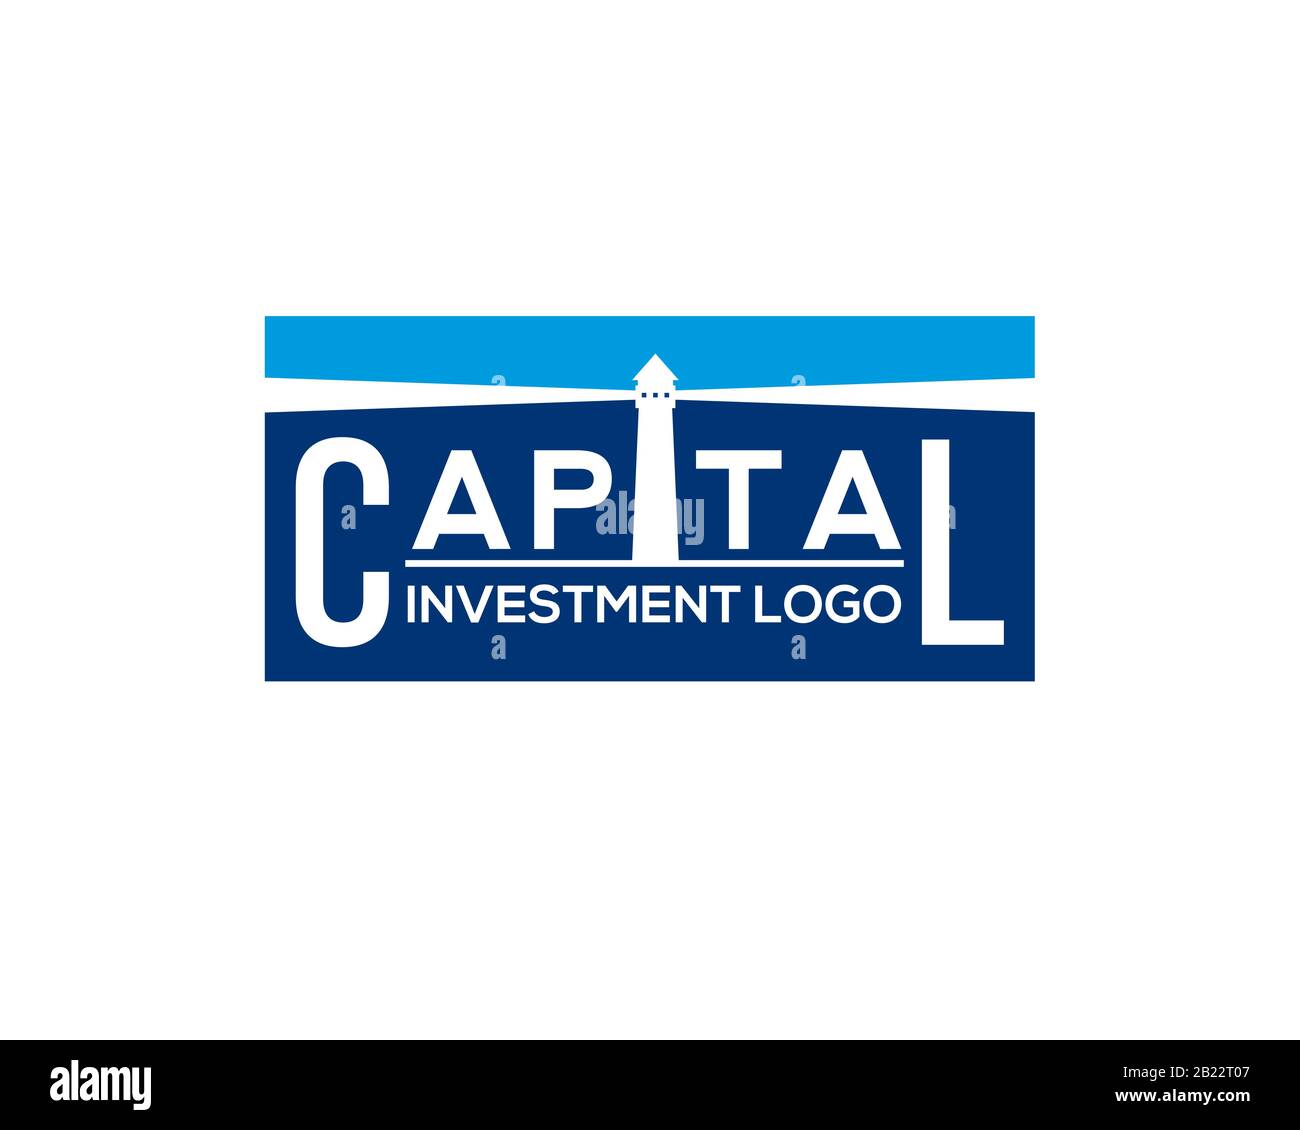 capital fund finance investment logo with lighthouse tower building as negative space Stock Vector